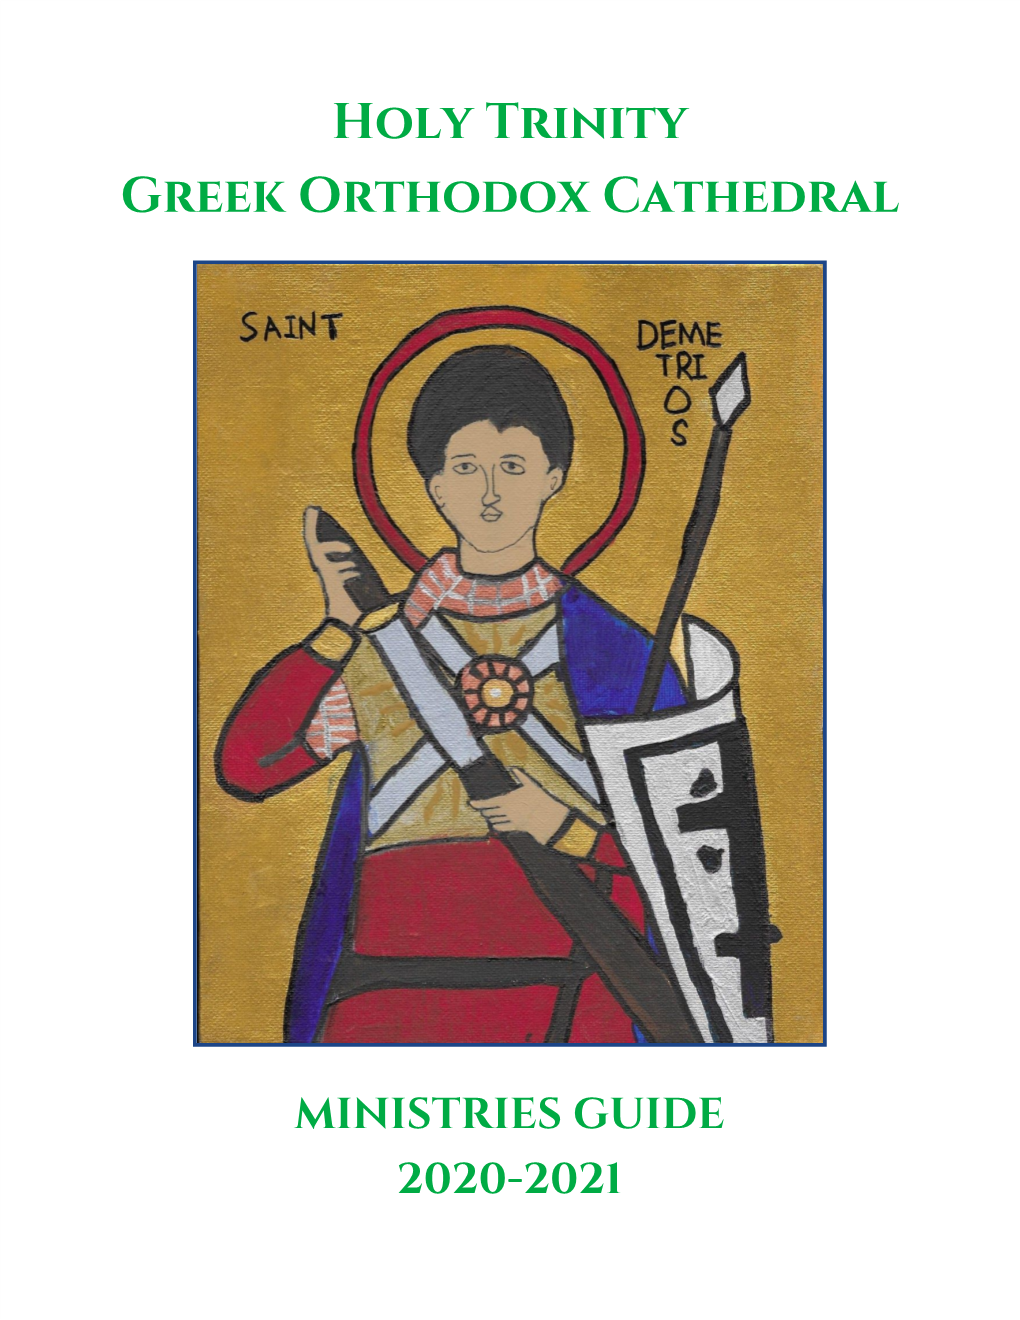 Ministries Guide 2020-2021